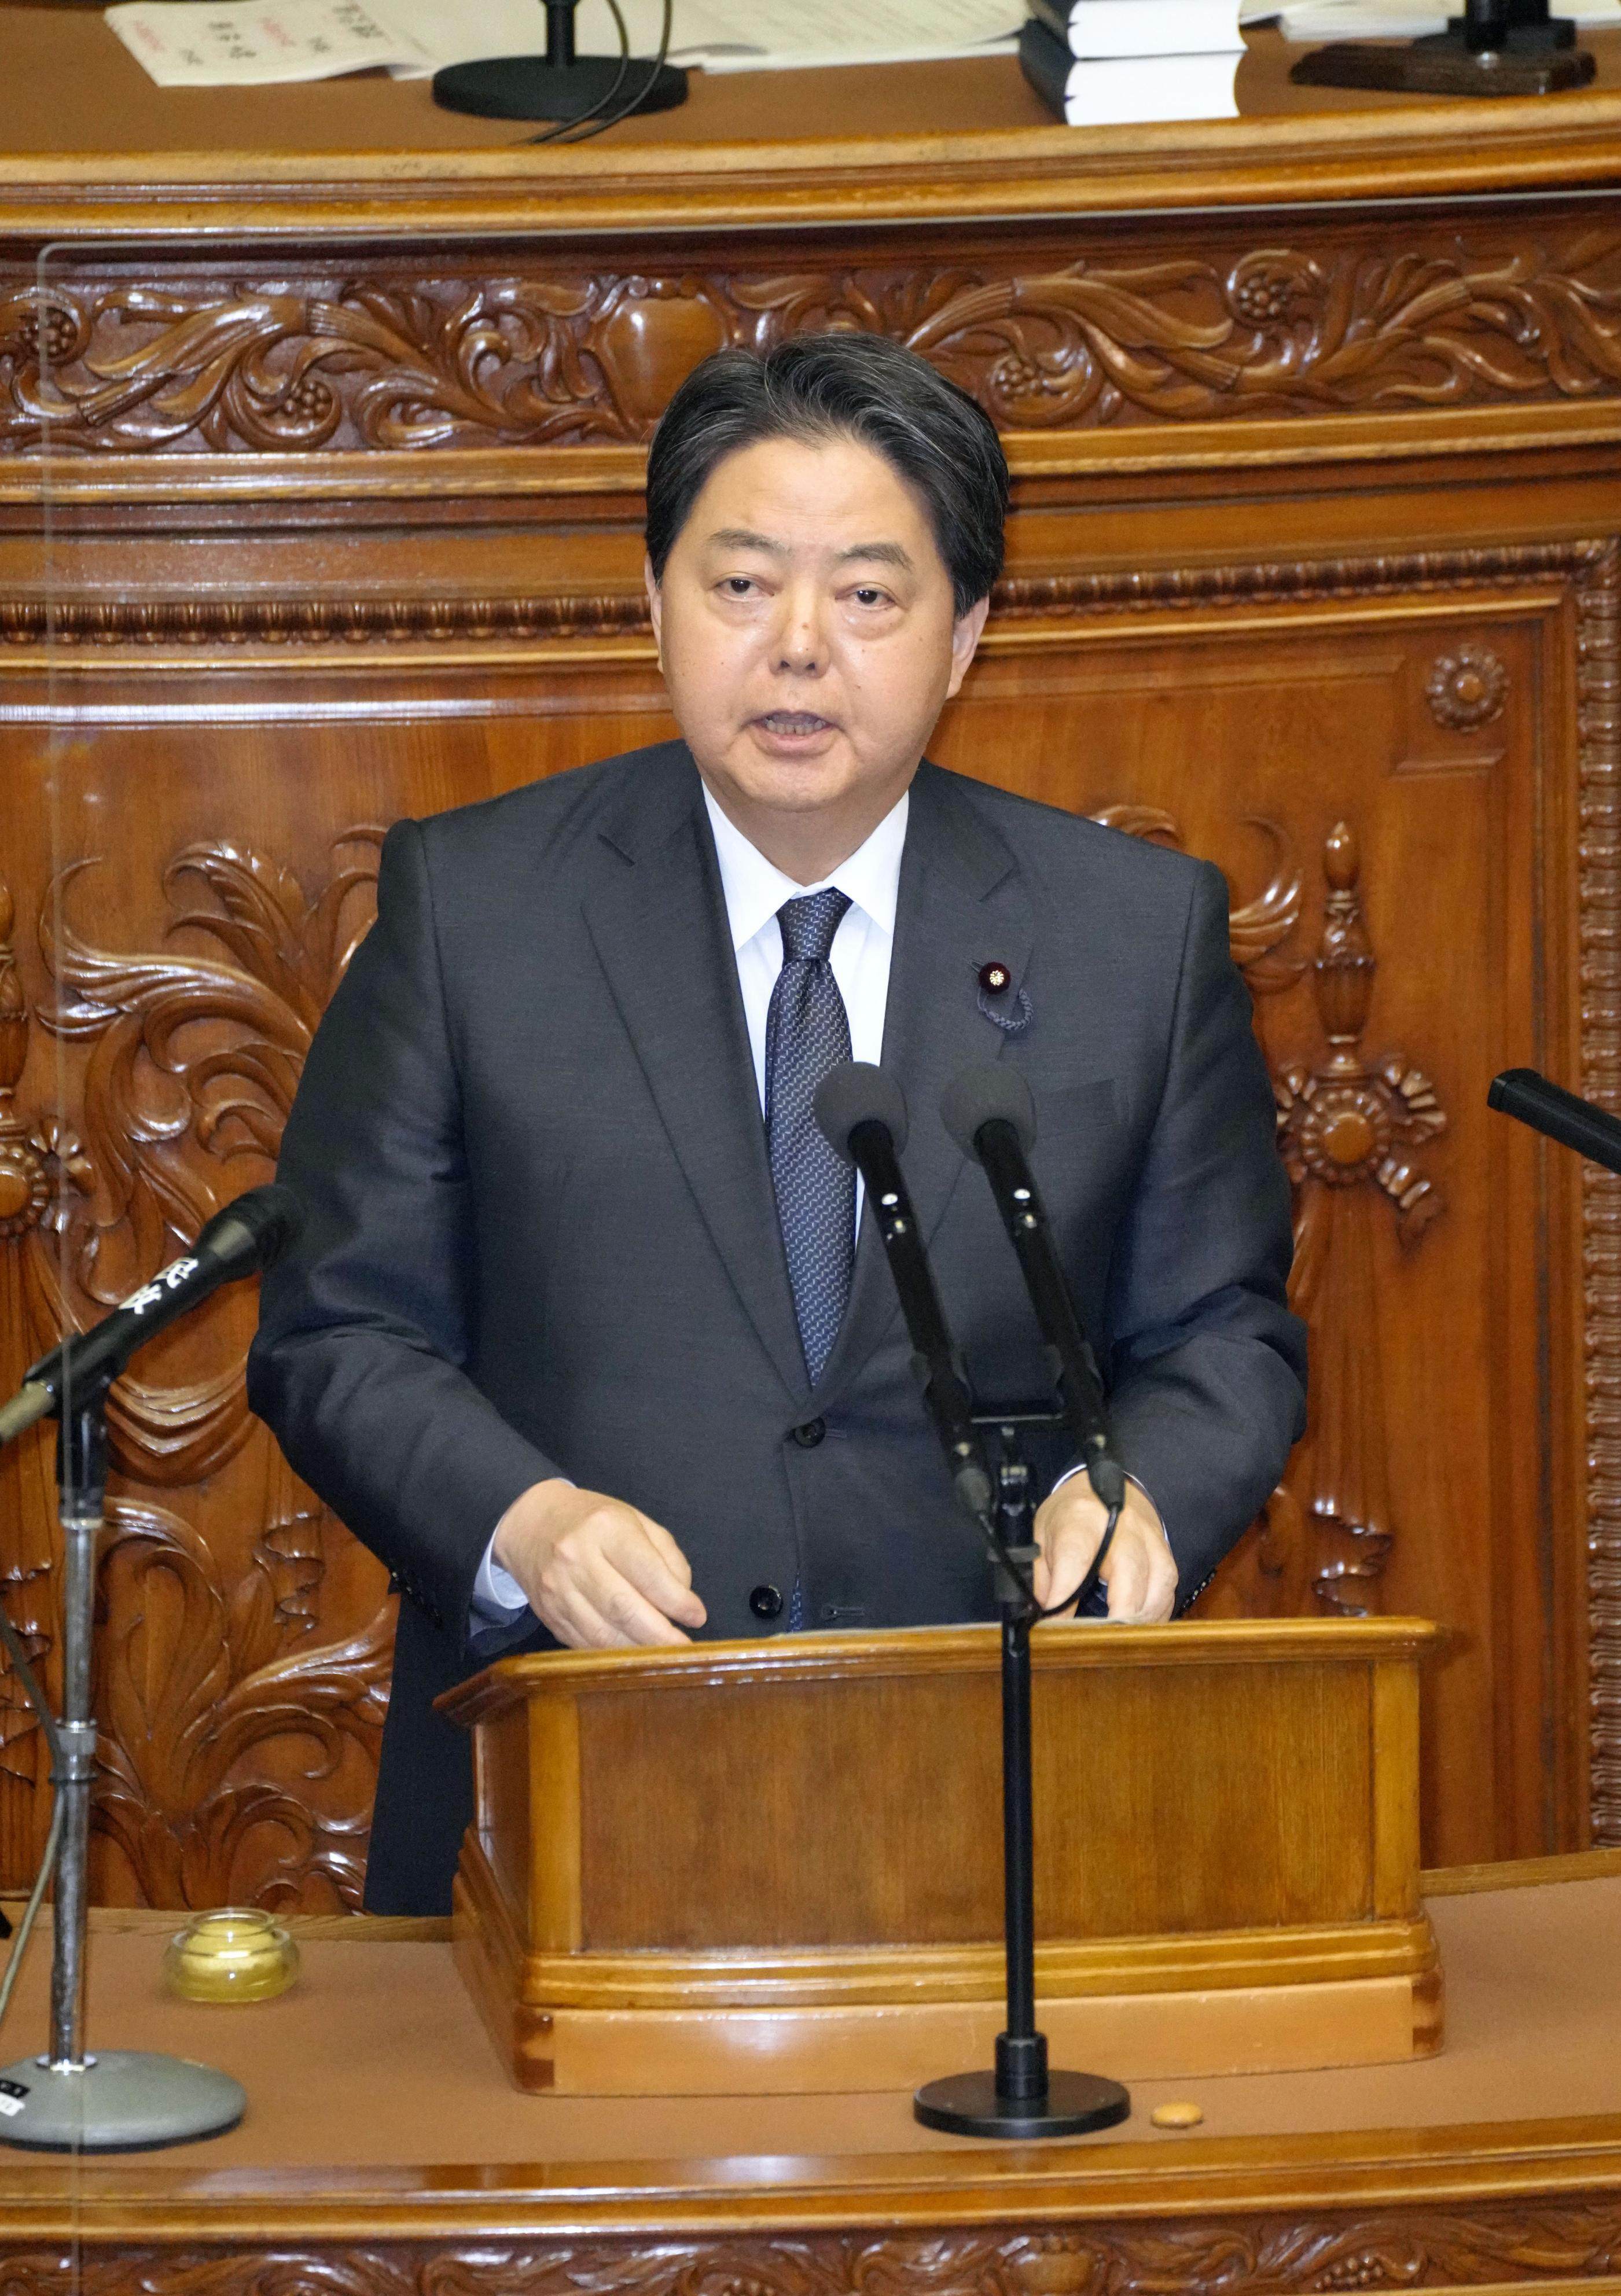 Japanese Foreign Minister Yoshimasa Hayashi, who is on an official visit to the Solomon Islands. File photo: Kyodo